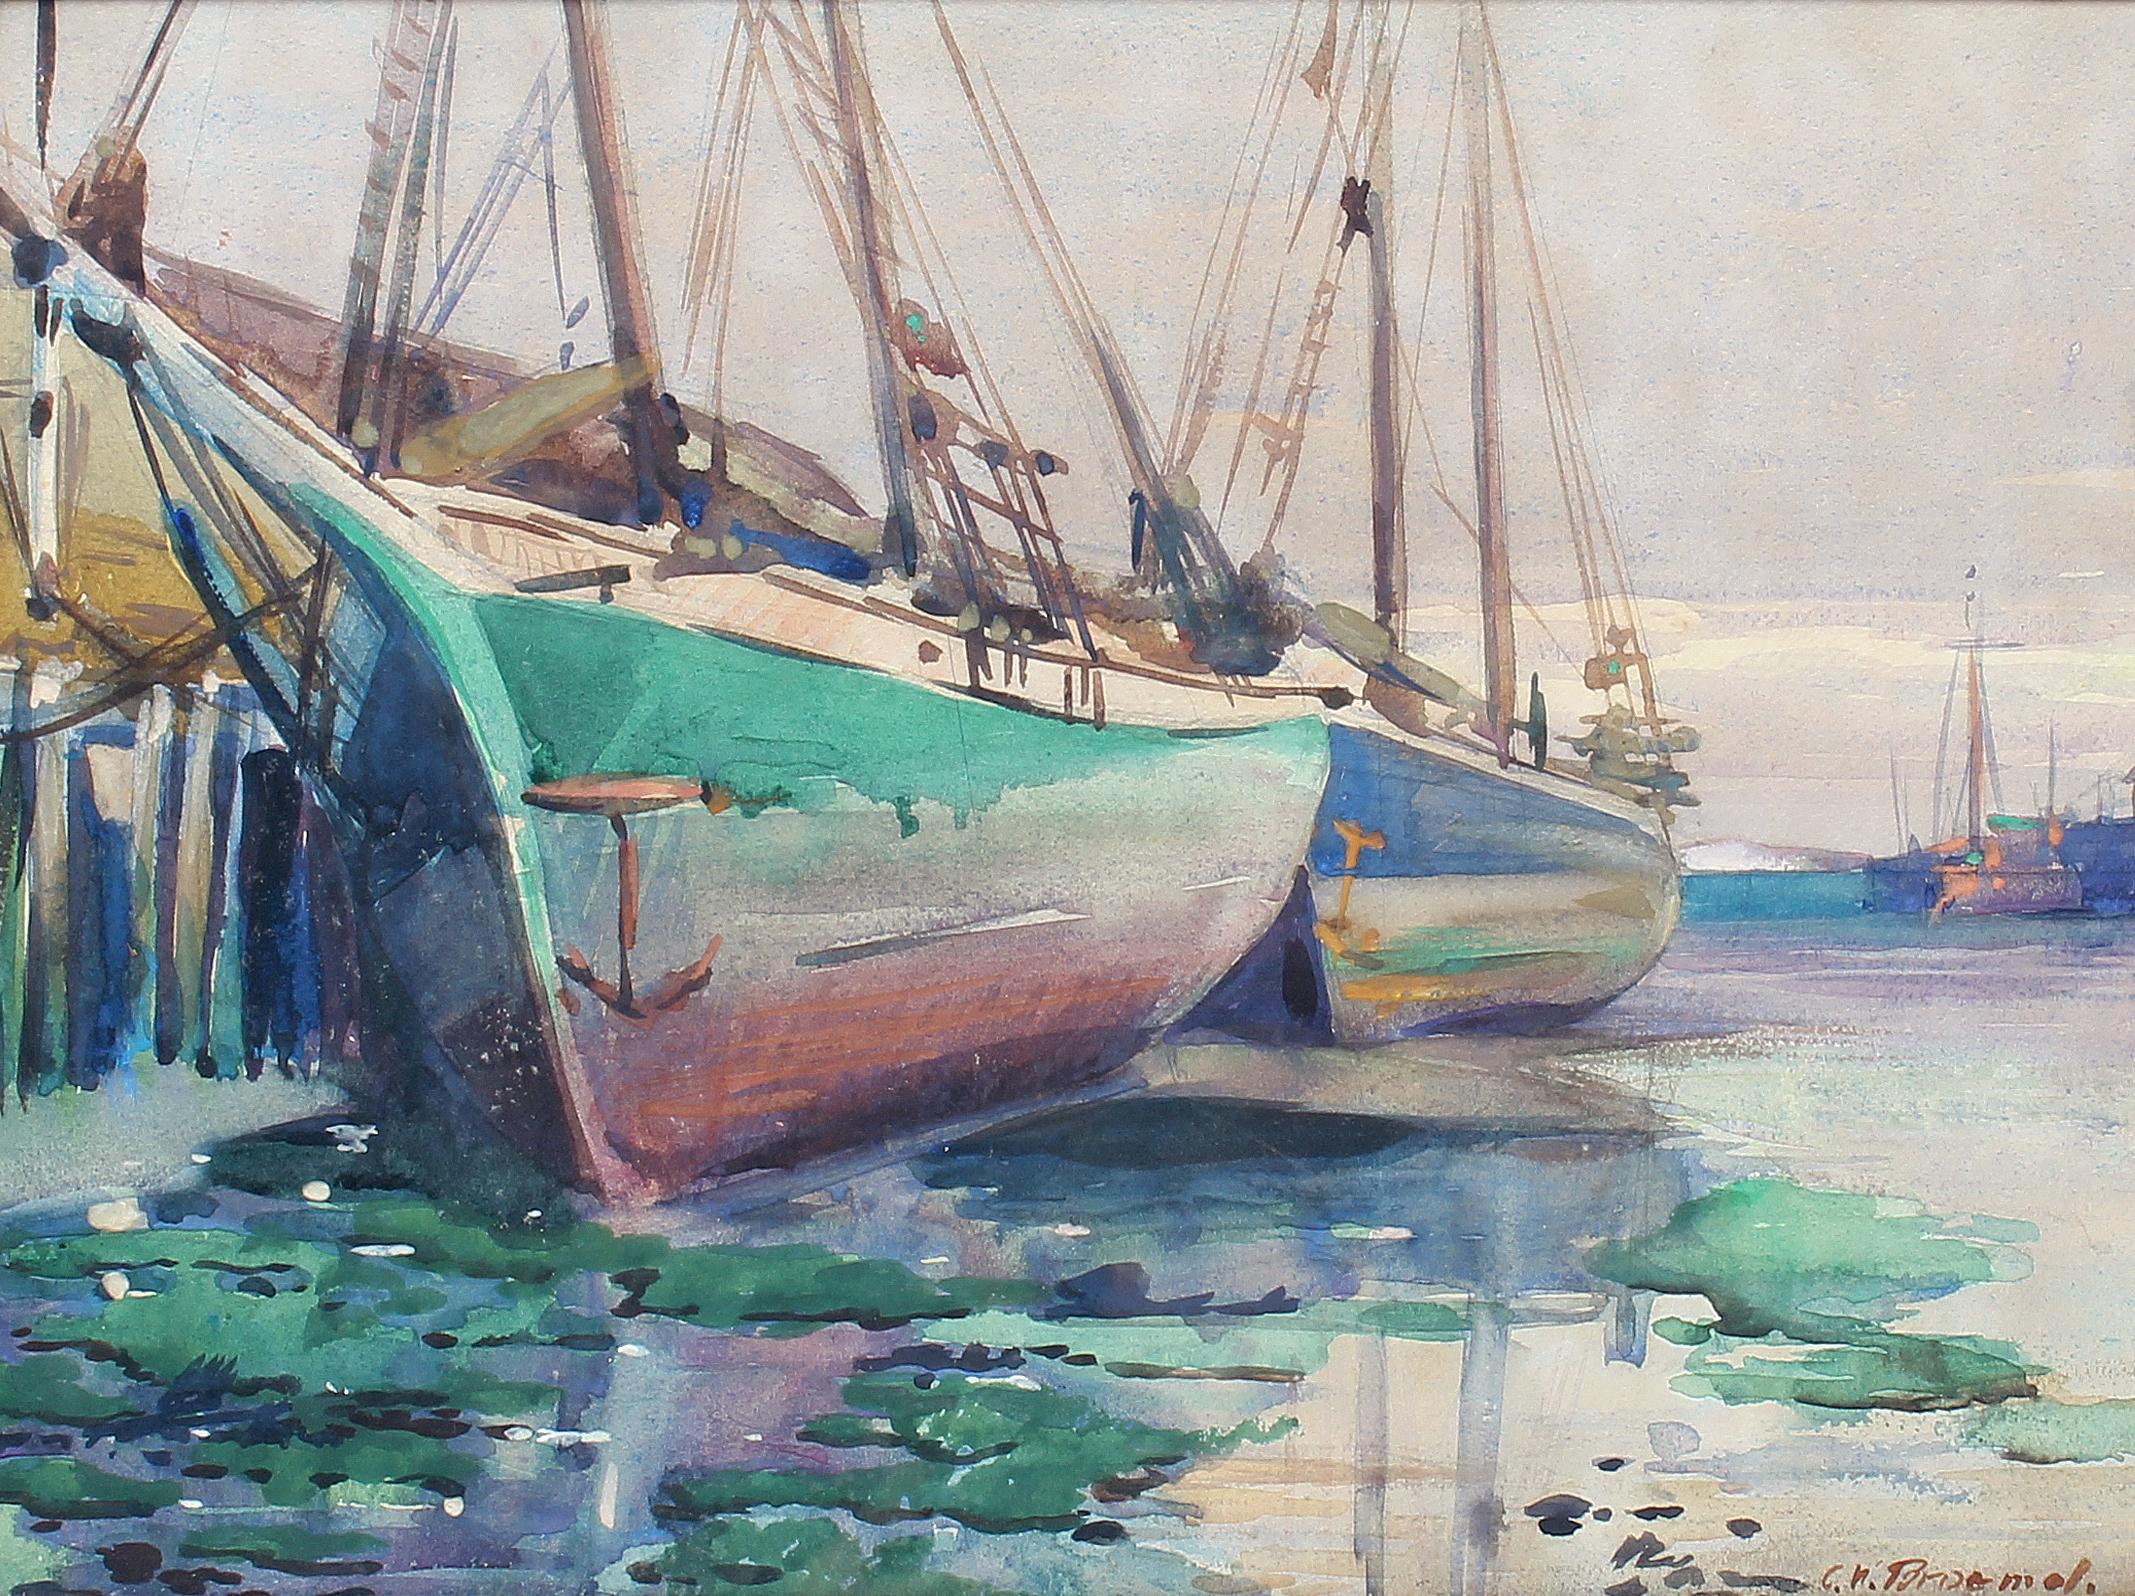 Original watercolor of sailboats at dock by well listed artist Carl Broemel.  This work is stunning with wonderful colors and movement.  This piece is also housed in the original hand carved arts and crafts frame.

Carl William Broemel (1891-1984)